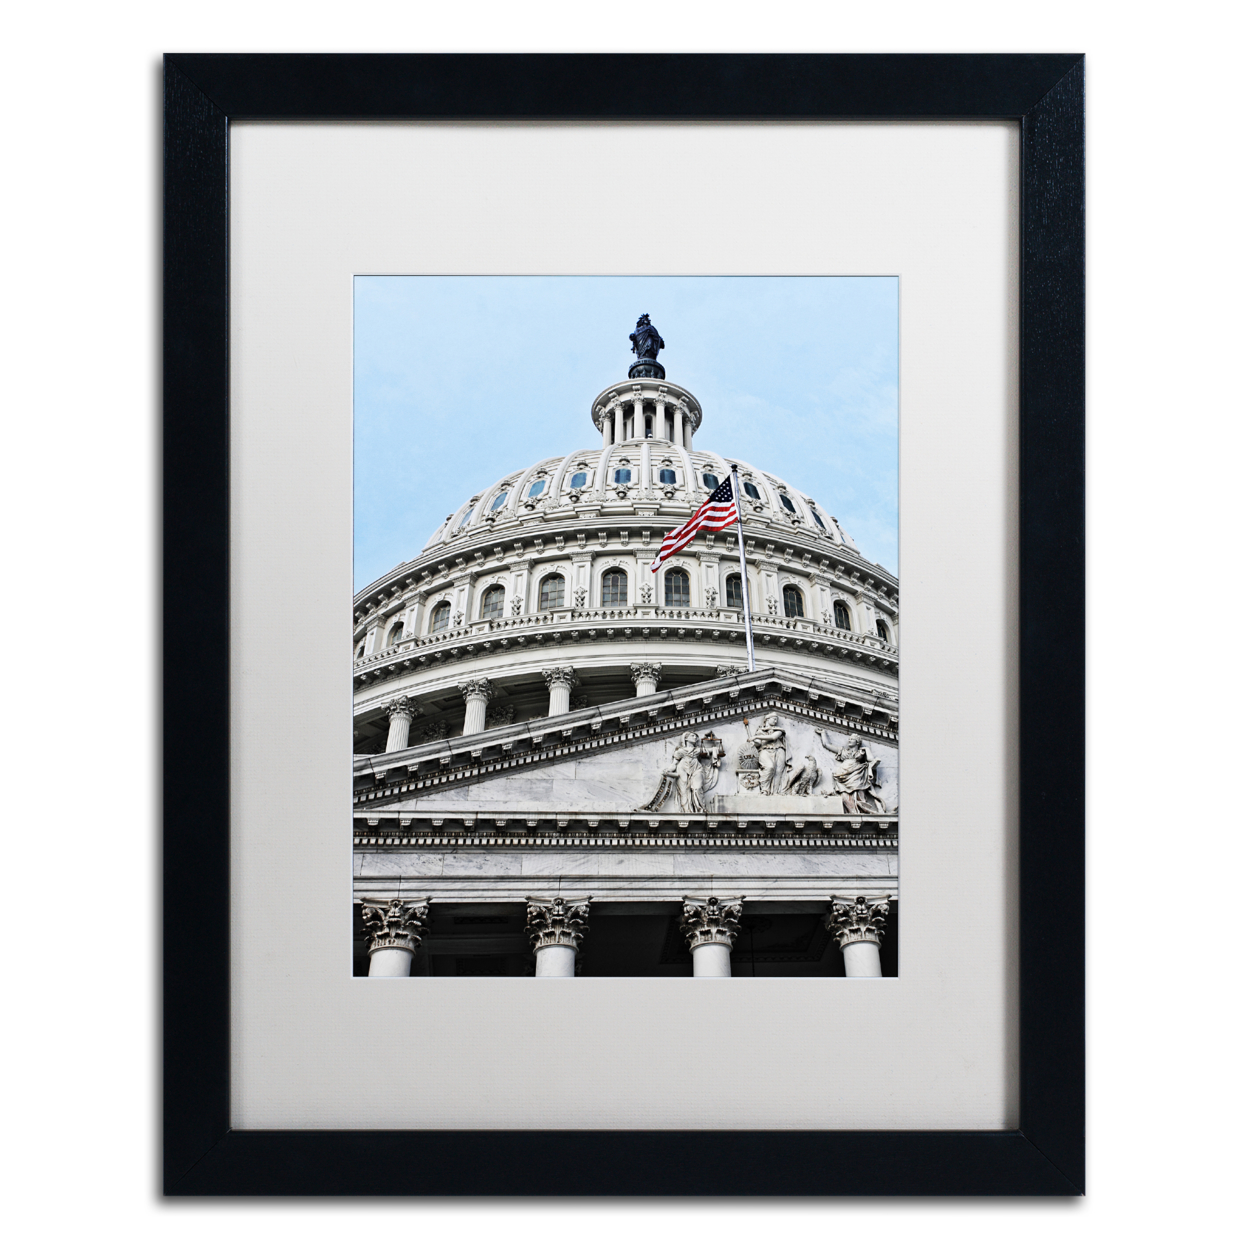 Gregory O'Hanlon 'Dome Of The US Capitol' Black Wooden Framed Art 18 X 22 Inches